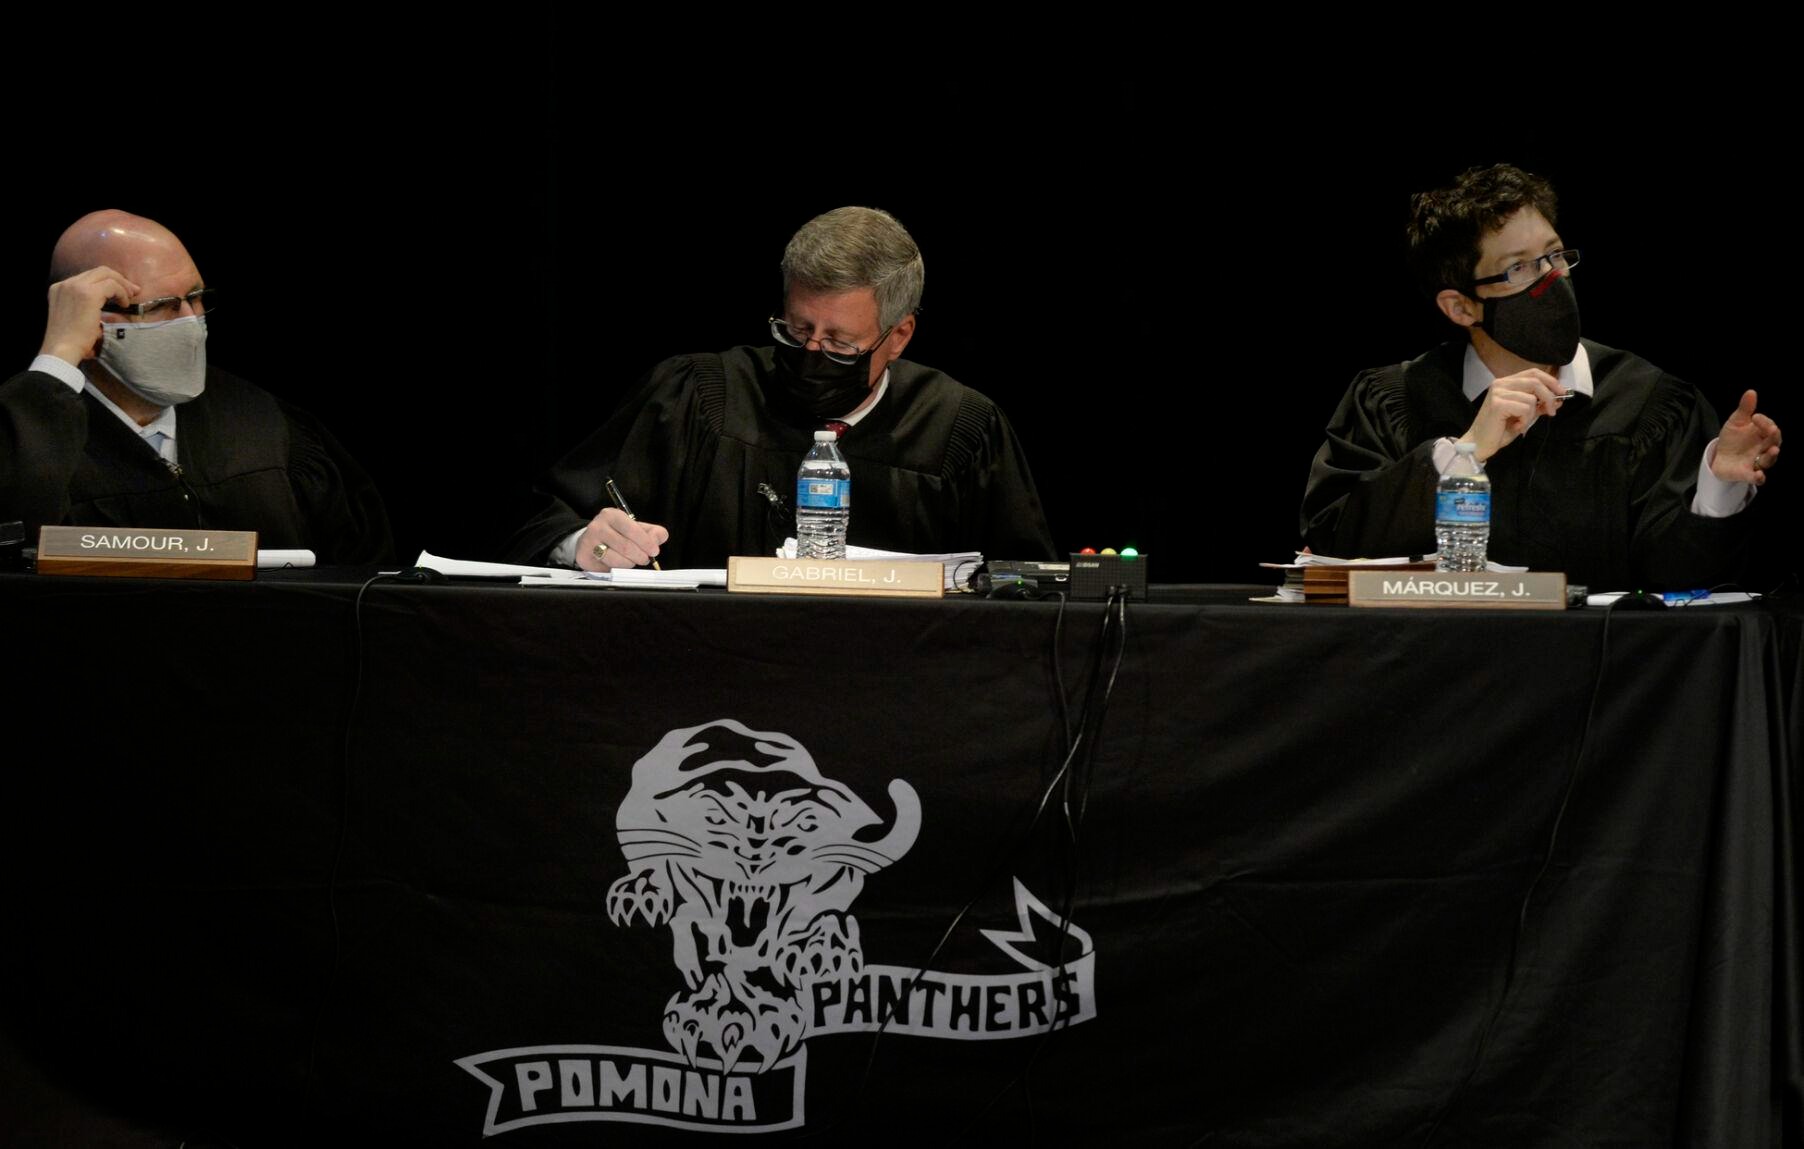 ARVADA, CO - OCTOBER 26: The Colorado Supreme Court, including left to right, justices Carlos A. Samour Jr., Richard L. Gabriel, and Monica M. Márquez.